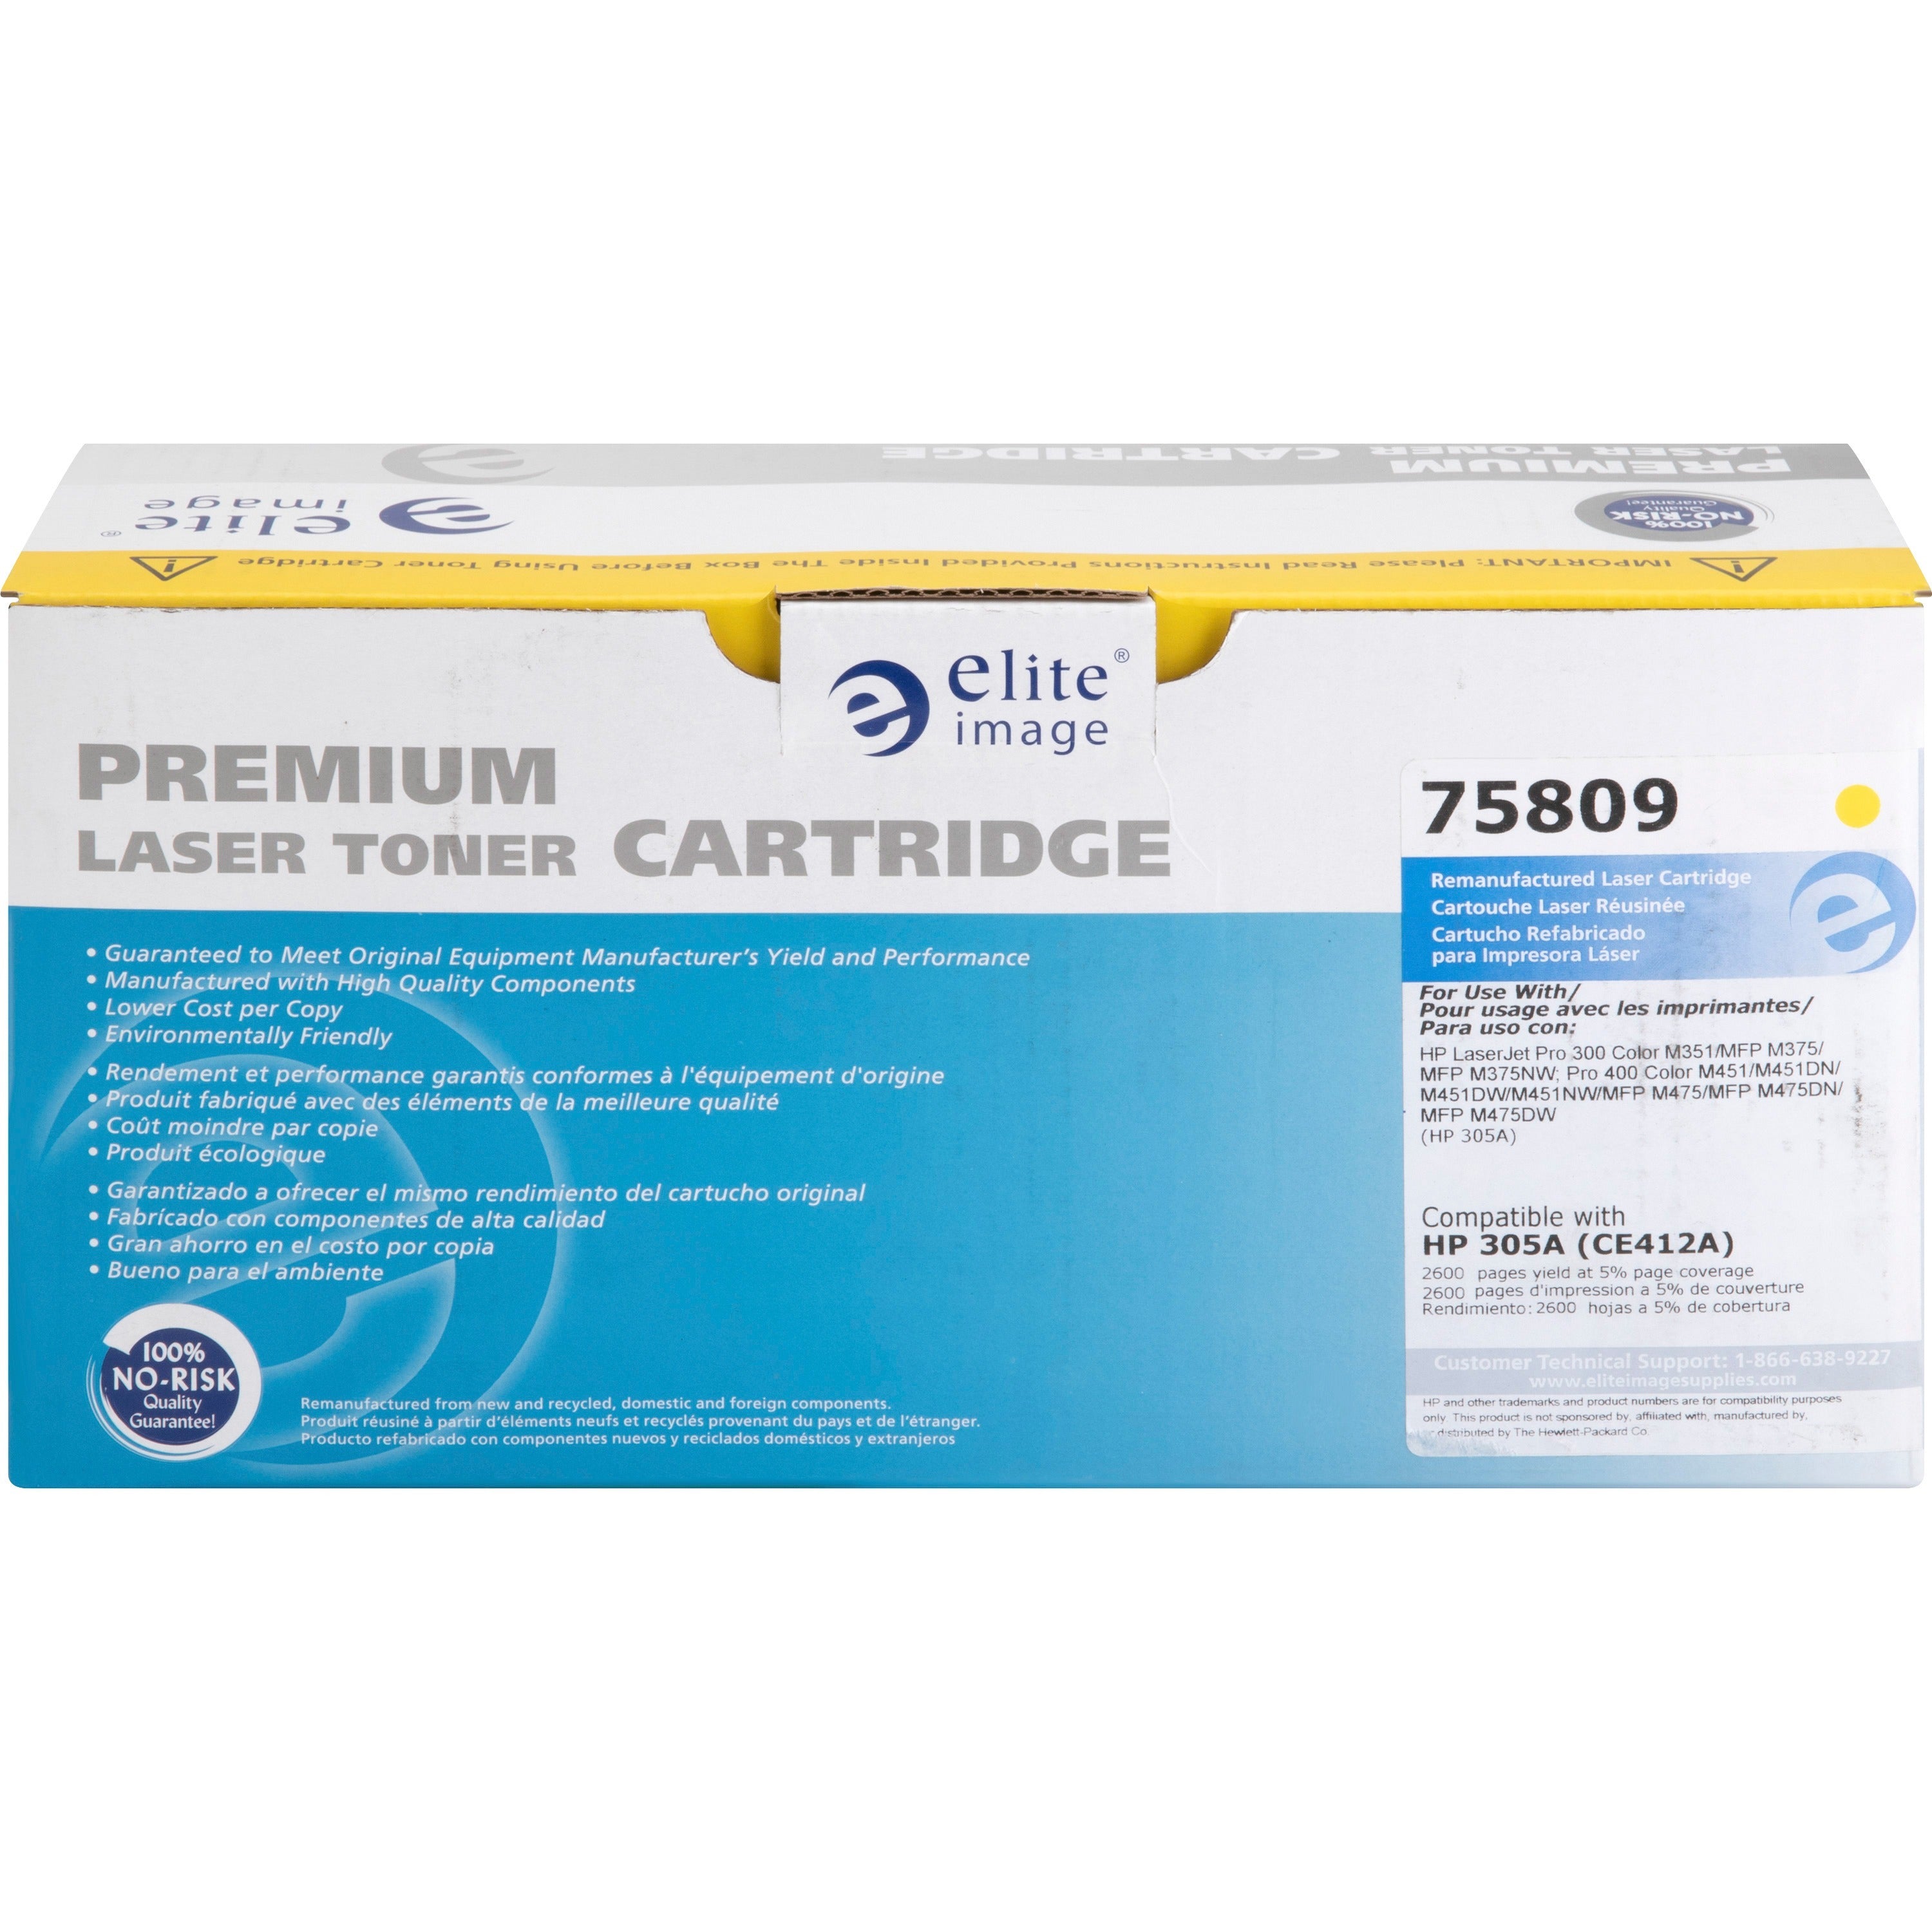 Elite Image Remanufactured Laser Toner Cartridge - Alternative for HP 305A (CE412A) - Yellow - 1 Each - 2600 Pages - 2